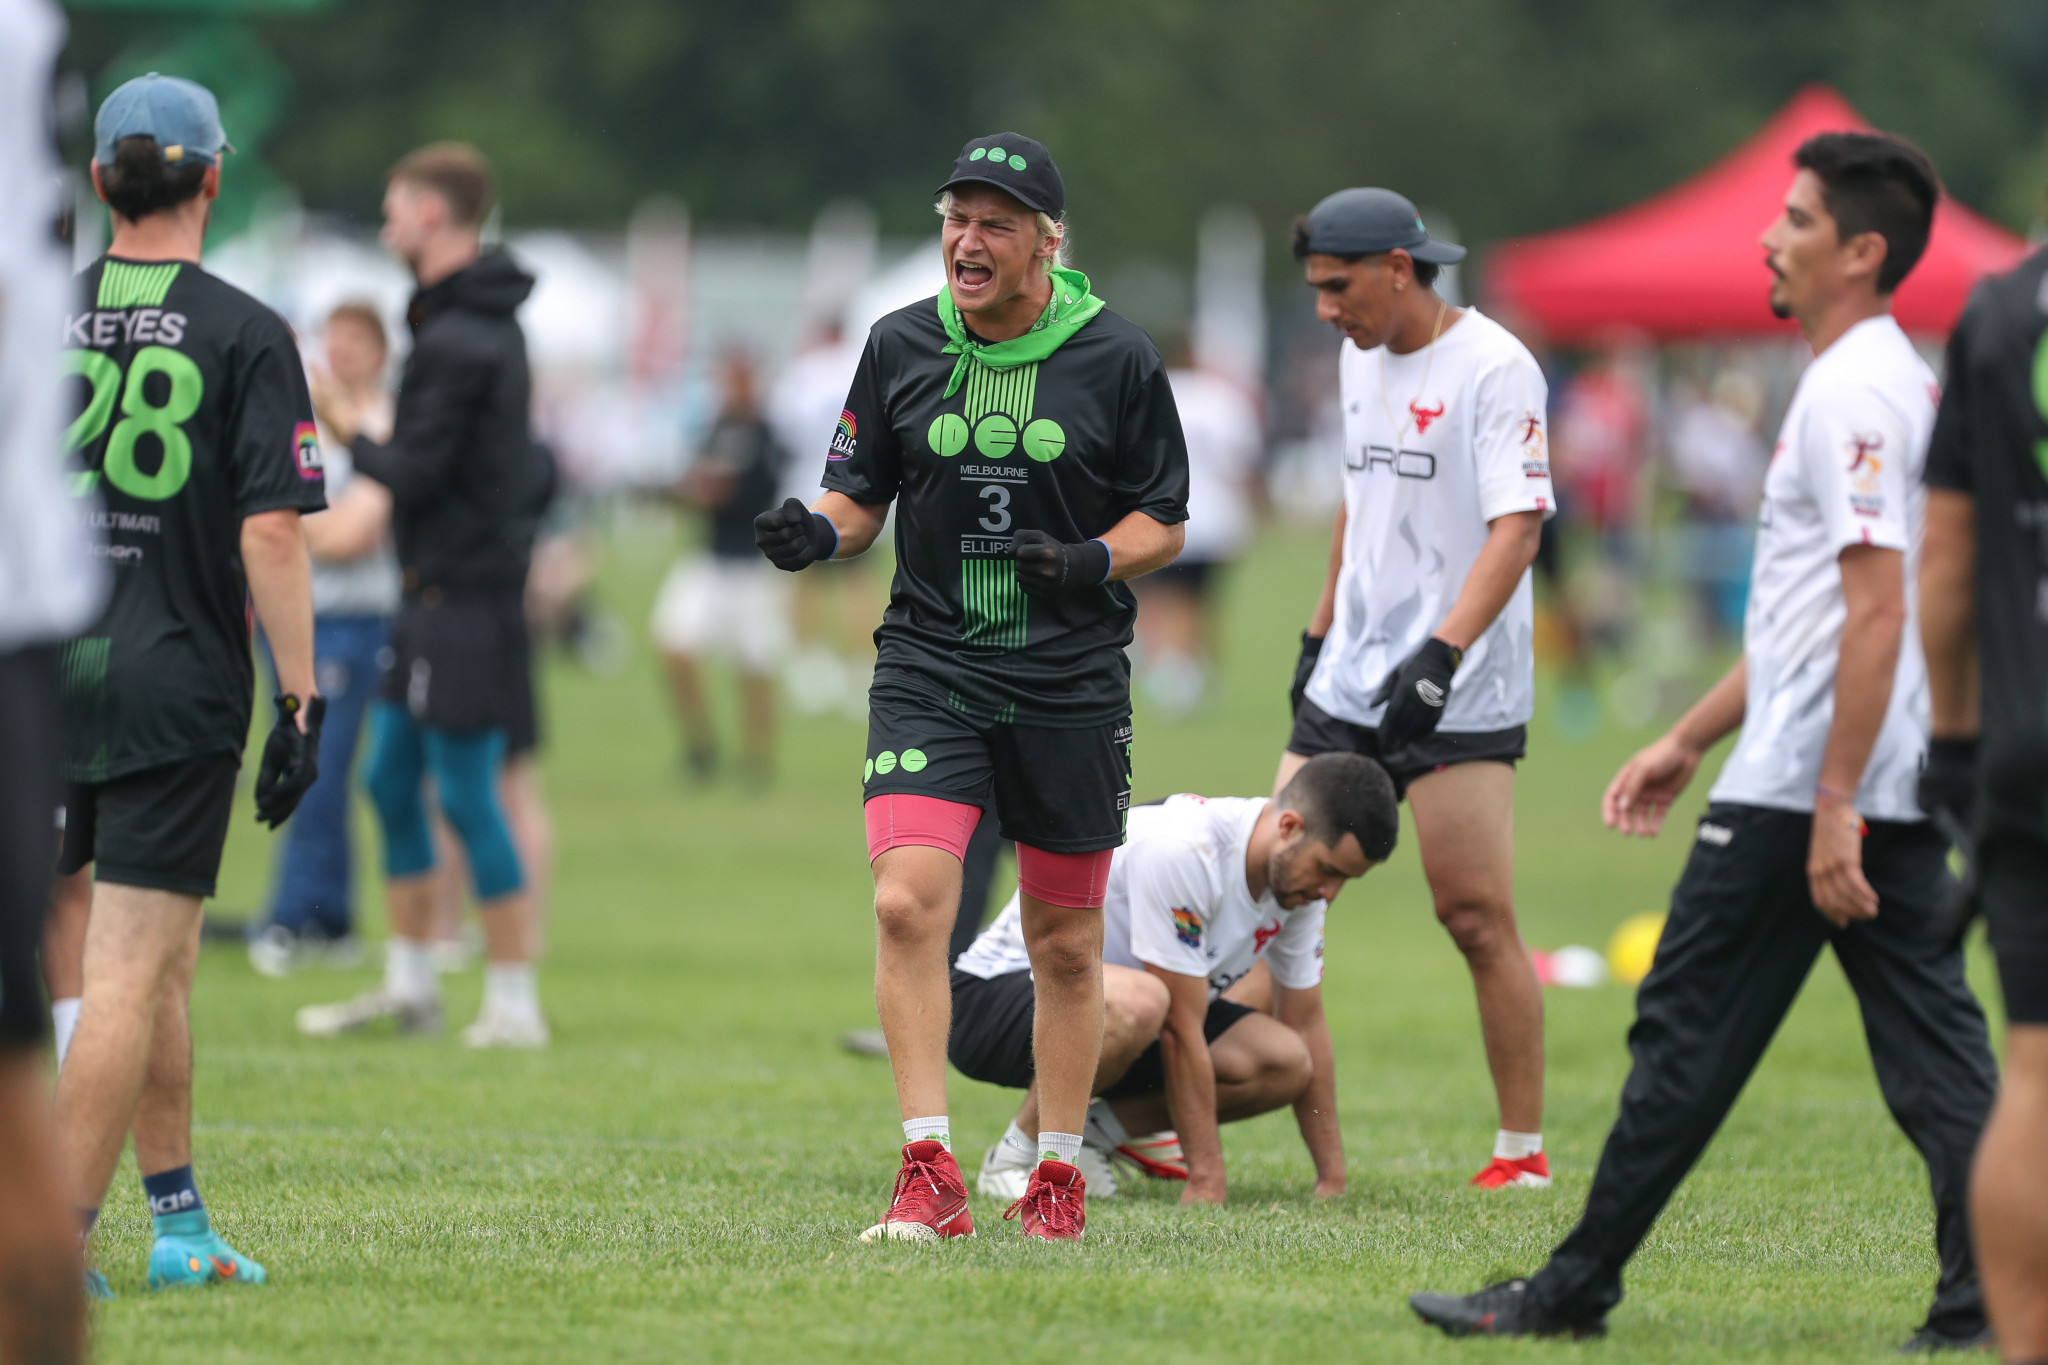 Melbourne Ellipsis' Robert Swan celebrated winning three from three ©Paul Rutherford for UltiPhotos